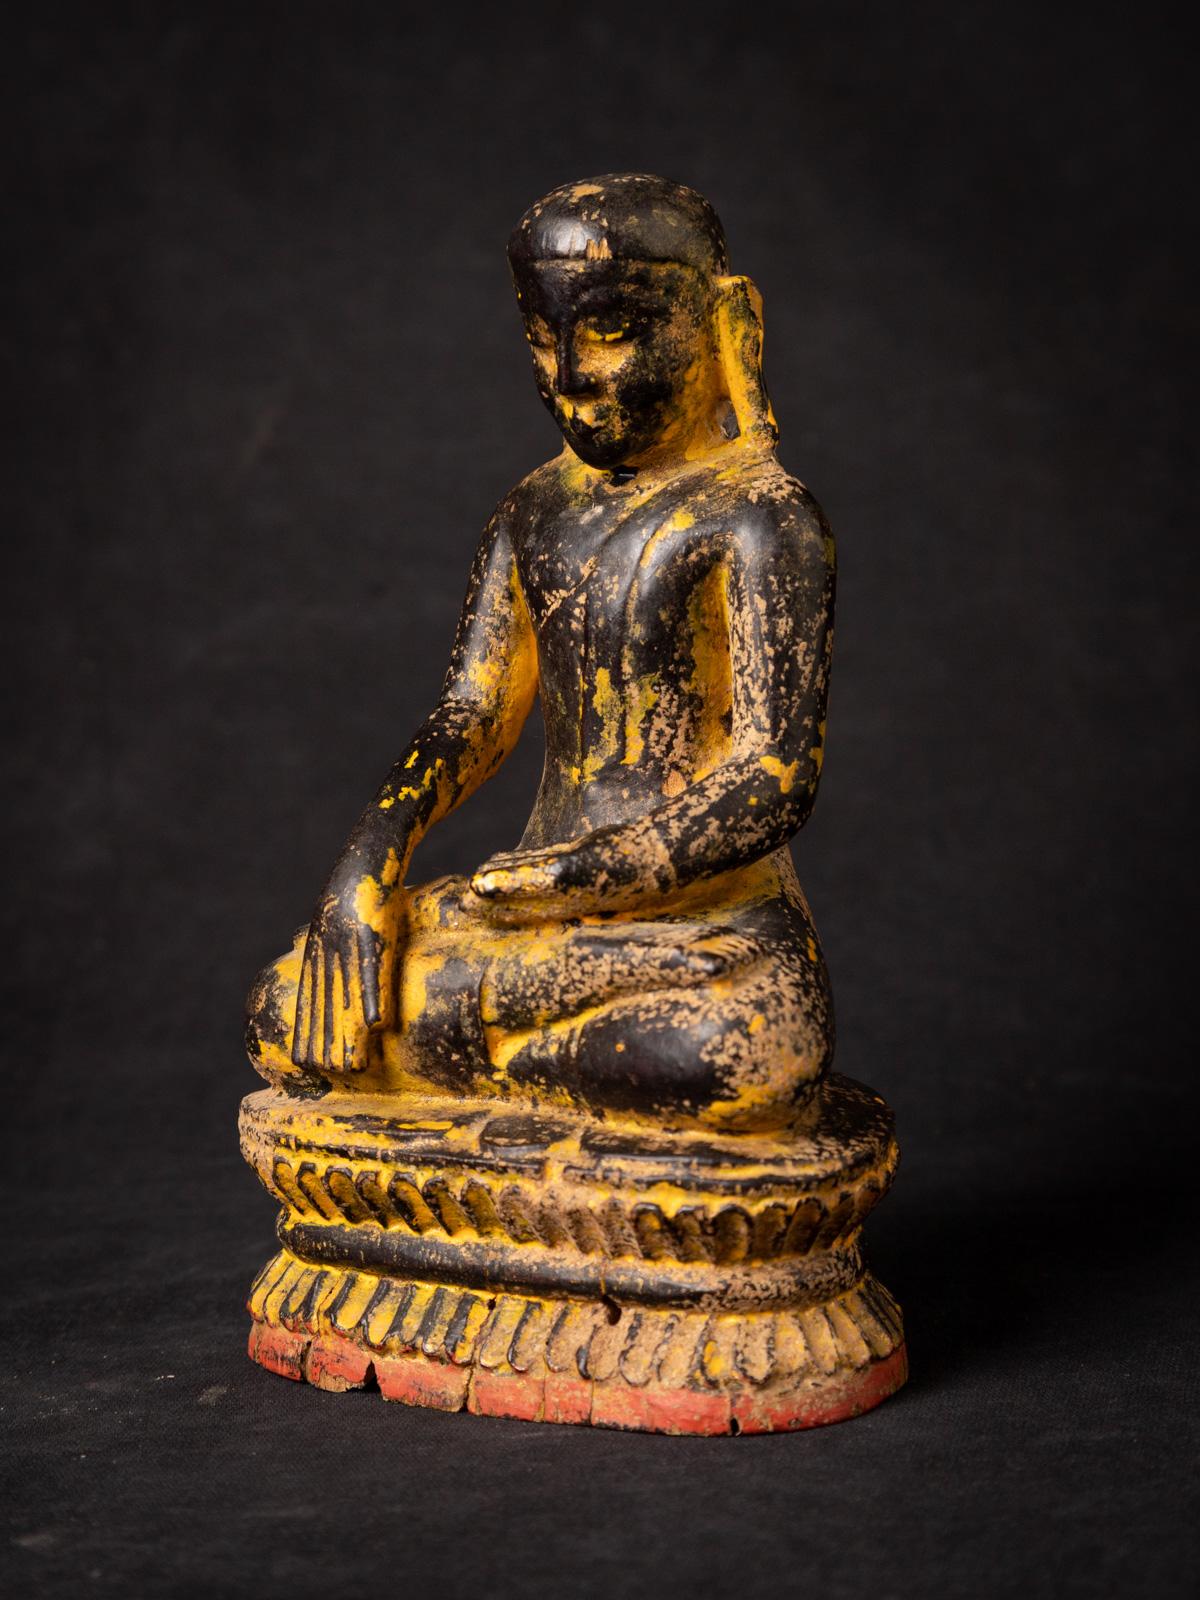 The very early antique wooden Burmese Monk statue is a remarkable and historically significant artifact originating from Burma. Crafted from wood, this statue stands at 19.2 cm in height and measures 11.6 cm in width and 8.2 cm in depth. Created in